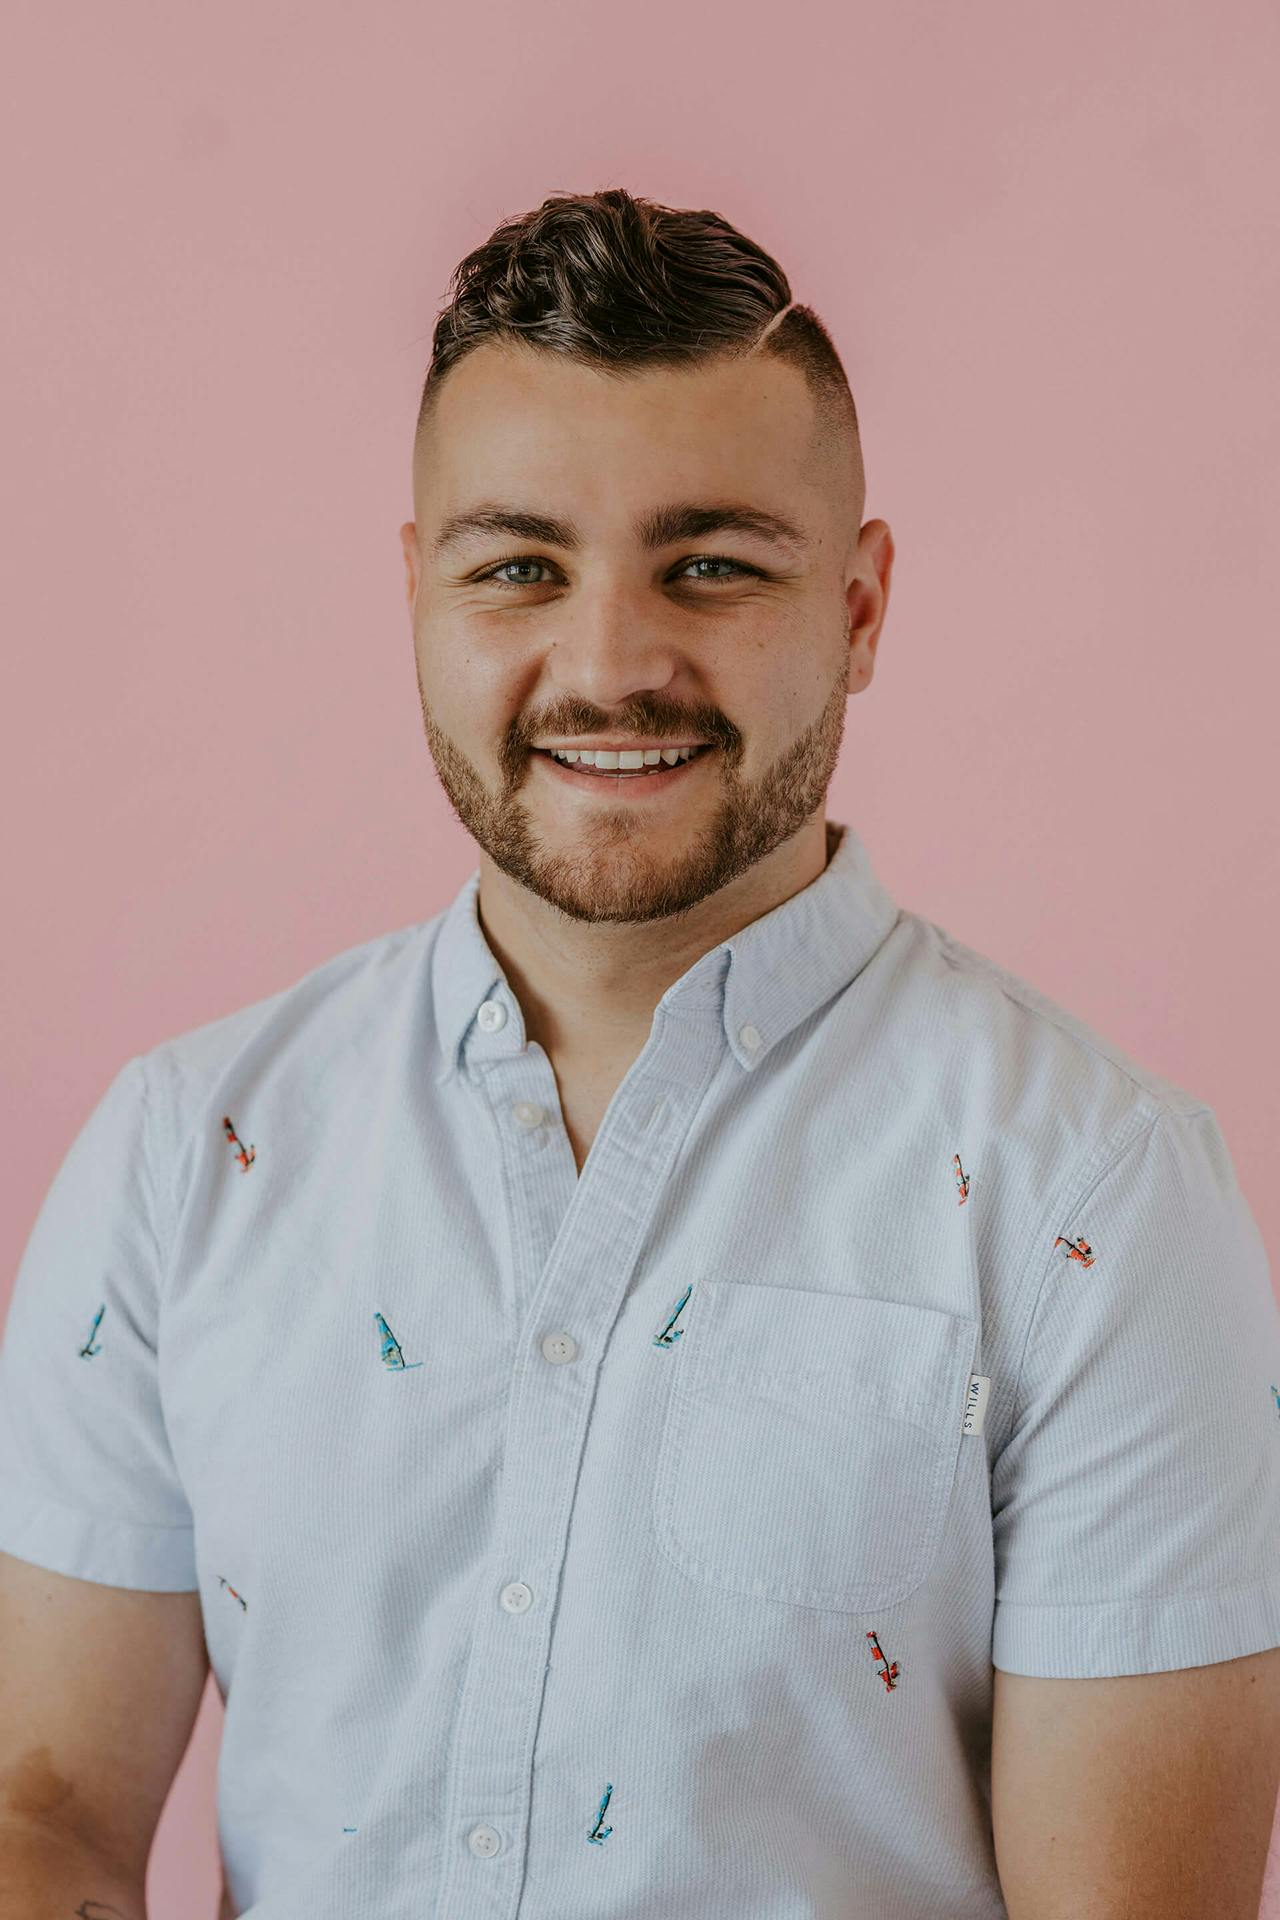 Yoni Gill was a Chief Operations Officer at Pixel Bakery Design Studio